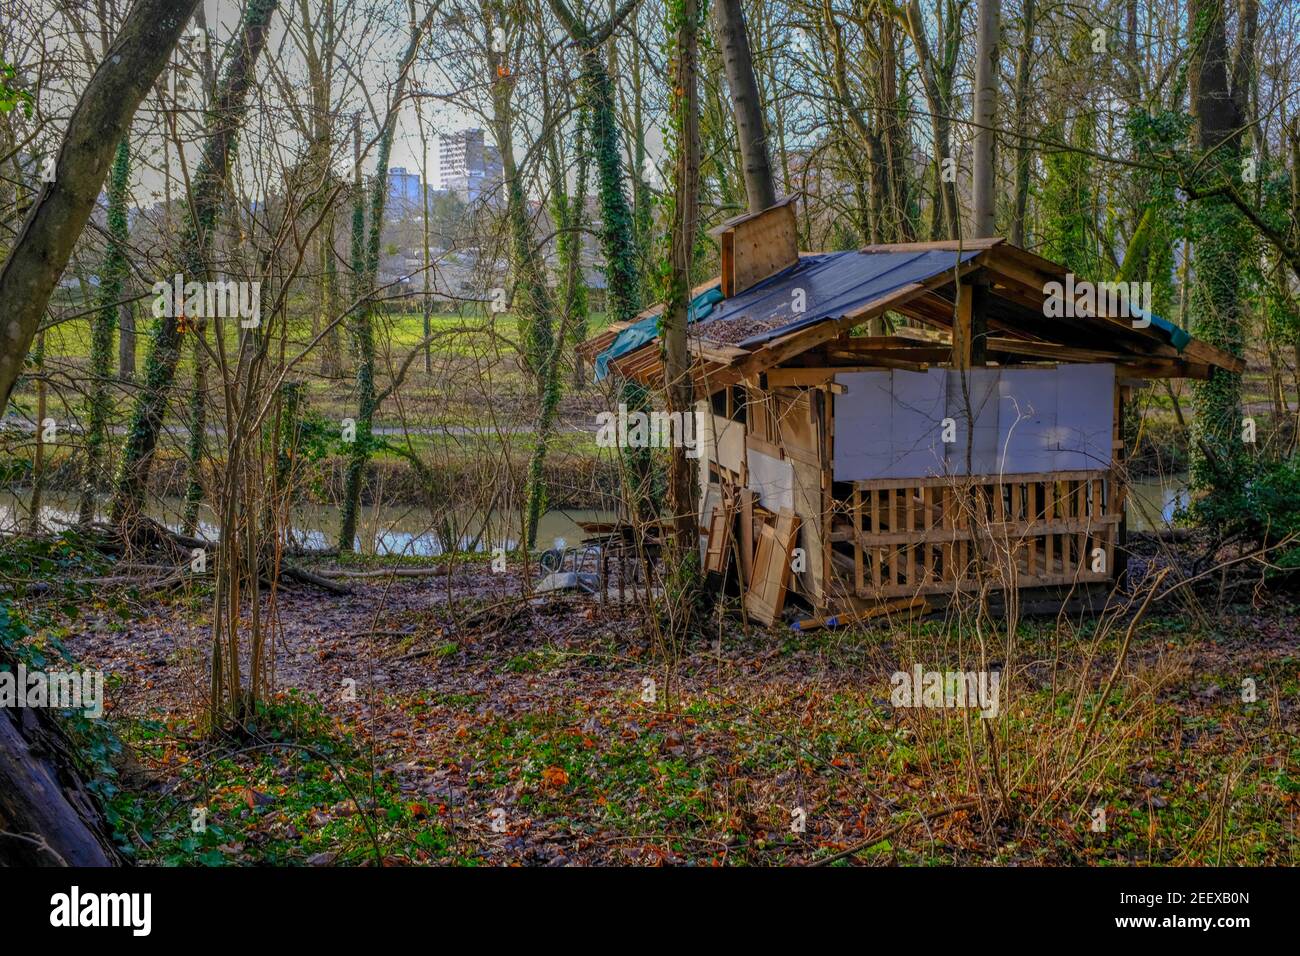 Dilapidated shack on the edge of a small river. Taken on a sunny winter day near Paris, France Stock Photo